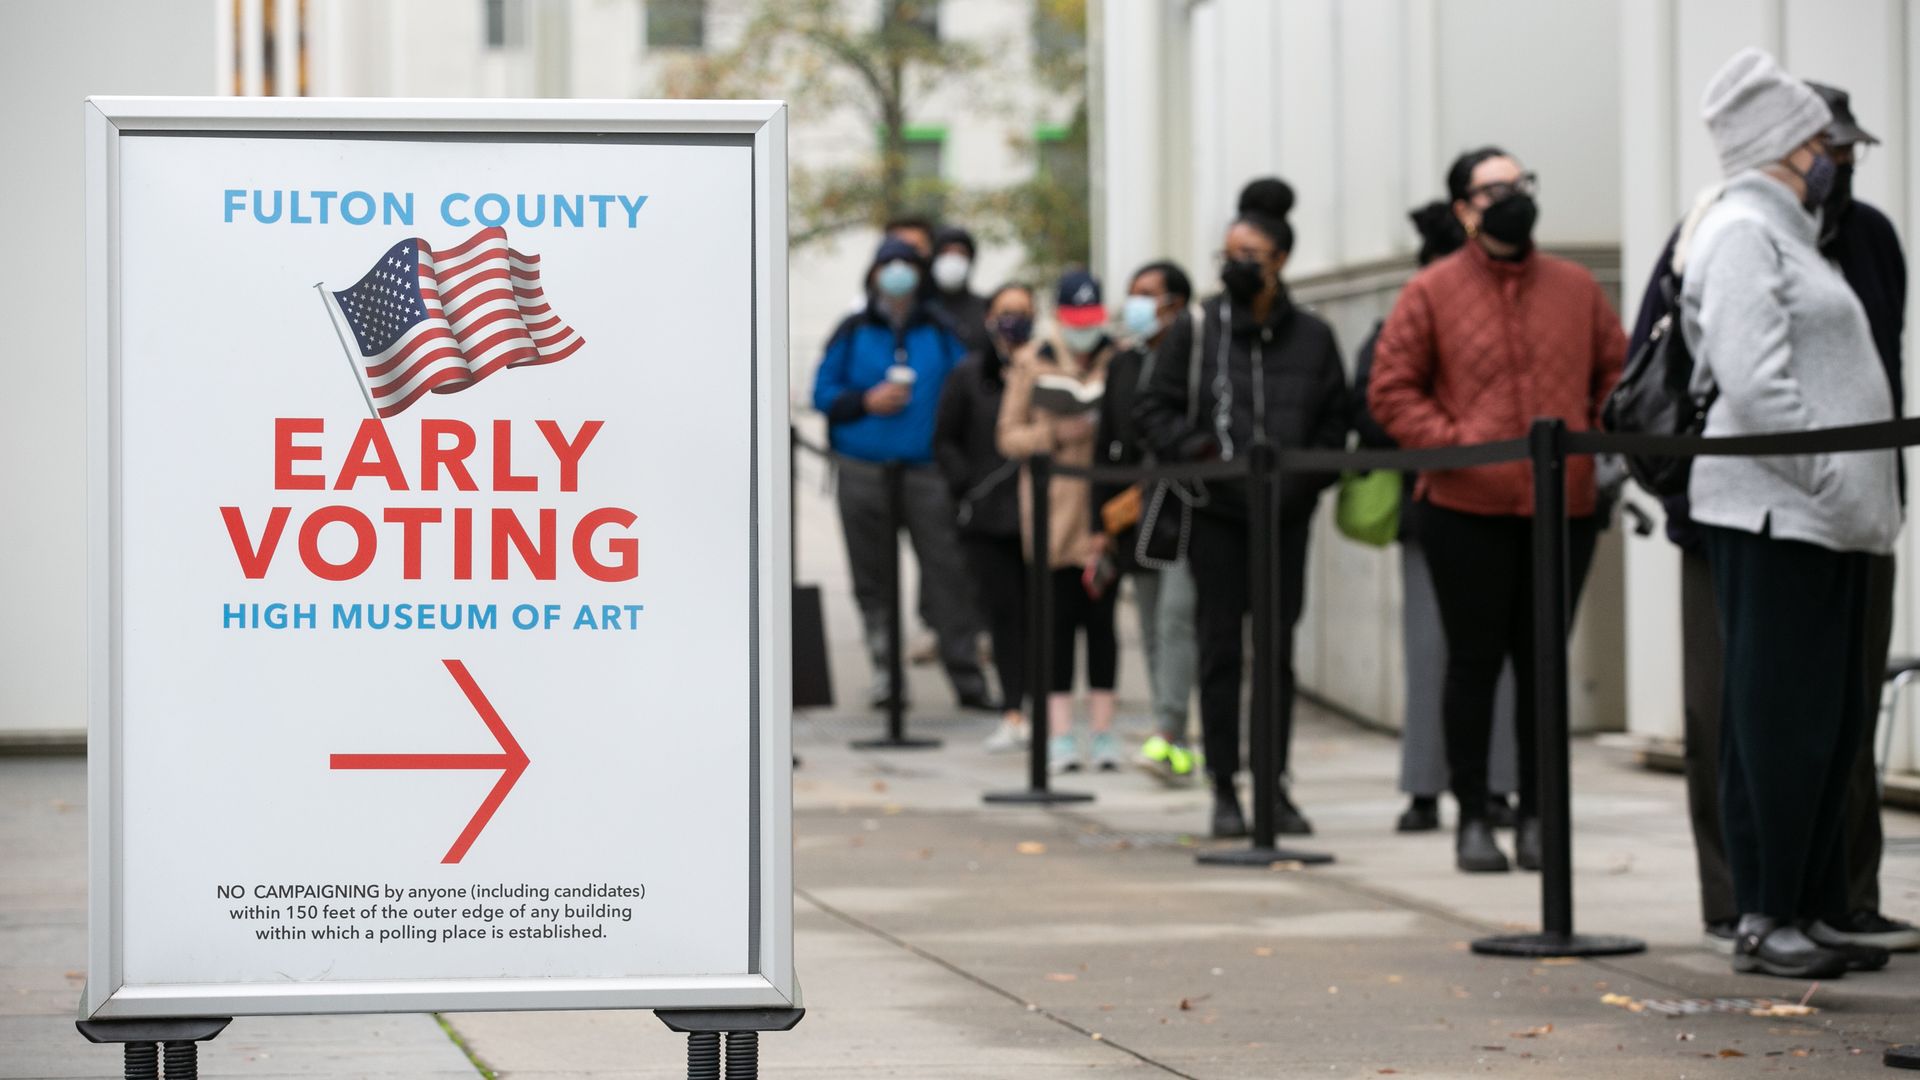 : Voters line up for the first day of early voting outside of the High Museum polling station on December 14, 2020 in Atlanta, Georgia.